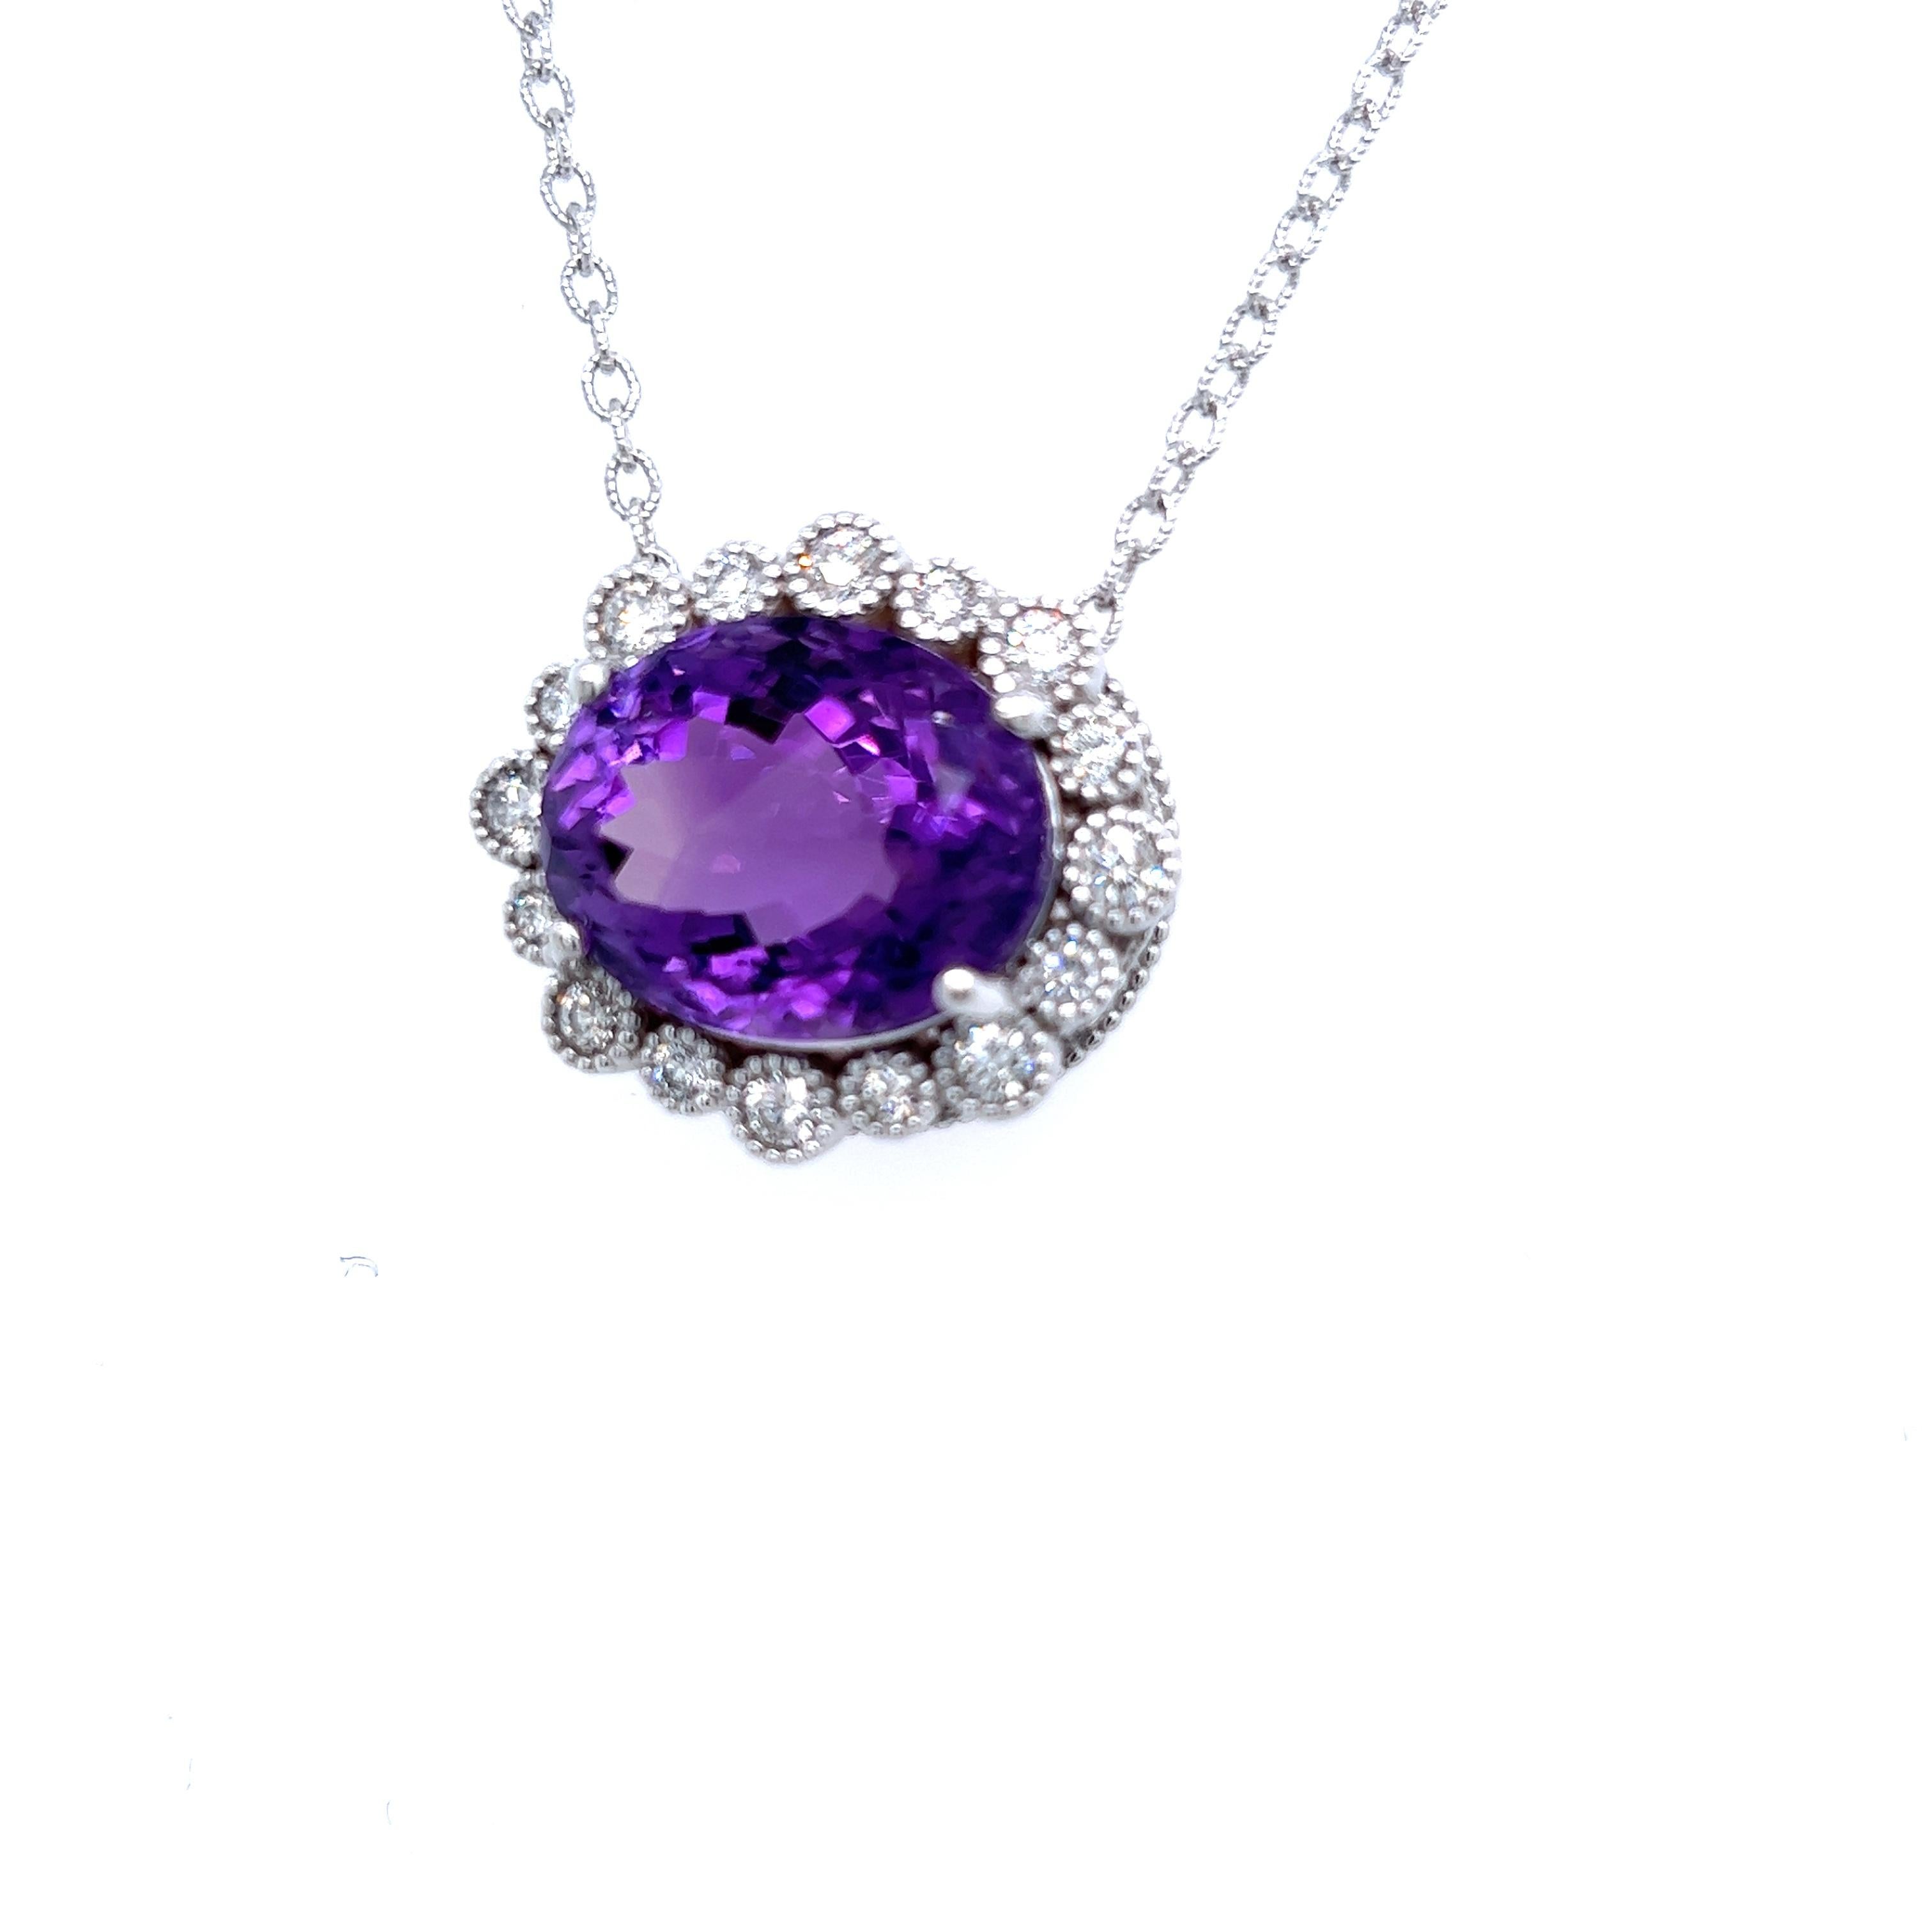 Natural Amethyst Diamond Pendant with Chain 14k W Gold 15.51 TCW Certified For Sale 3